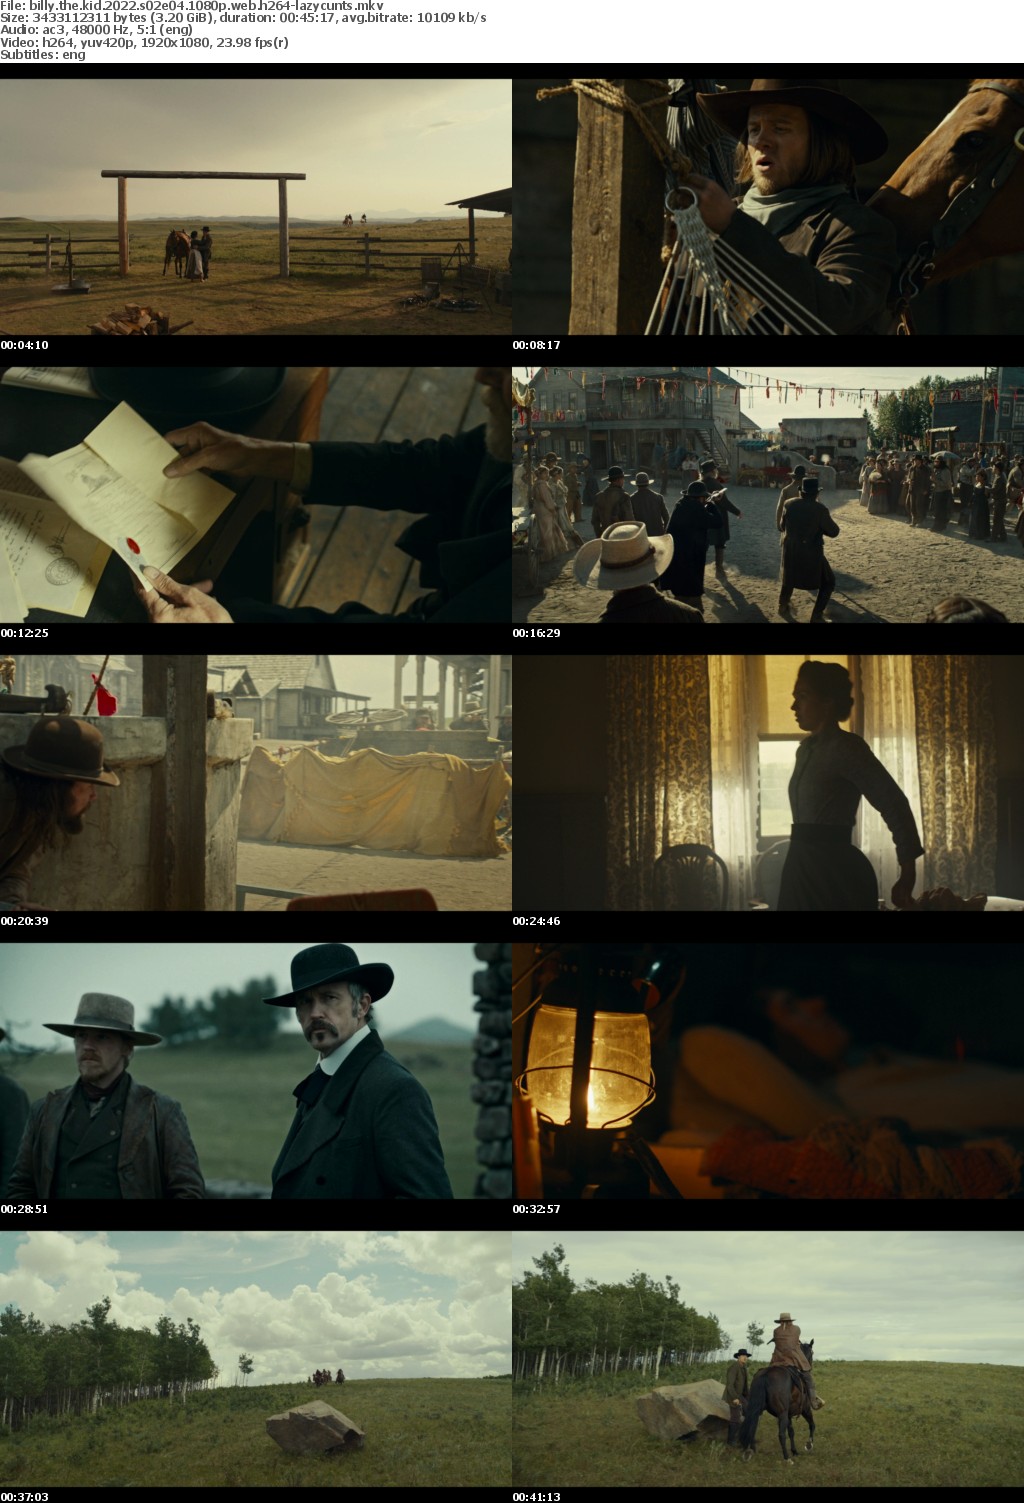 Billy the Kid 2022 S02E04 1080p WEB H264-LAZYCUNTS